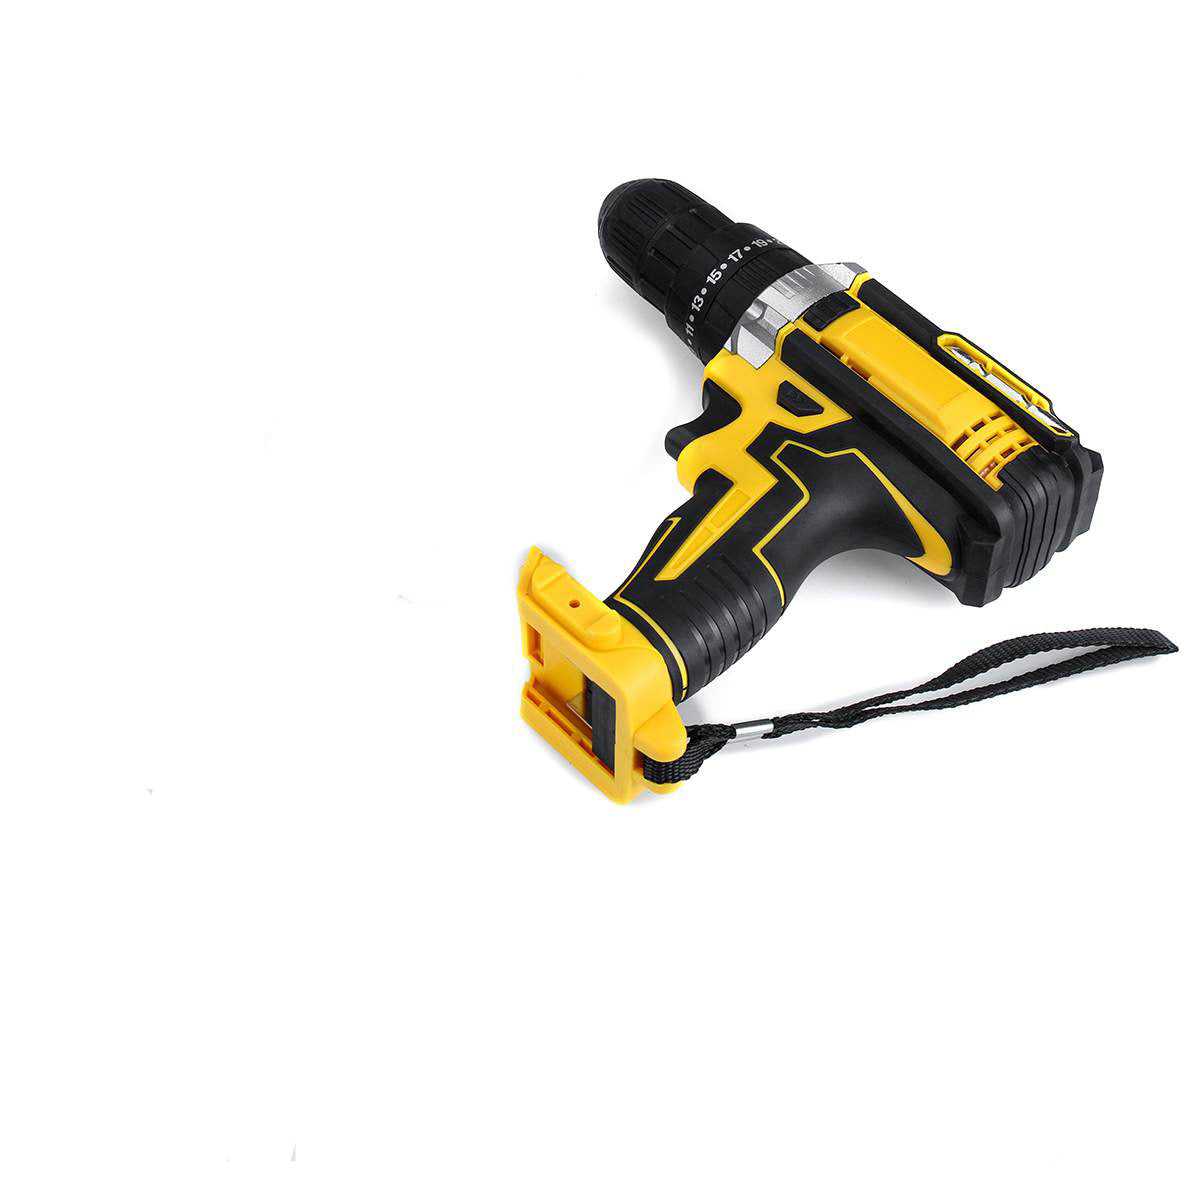 Multifunctional Household Impact Drill